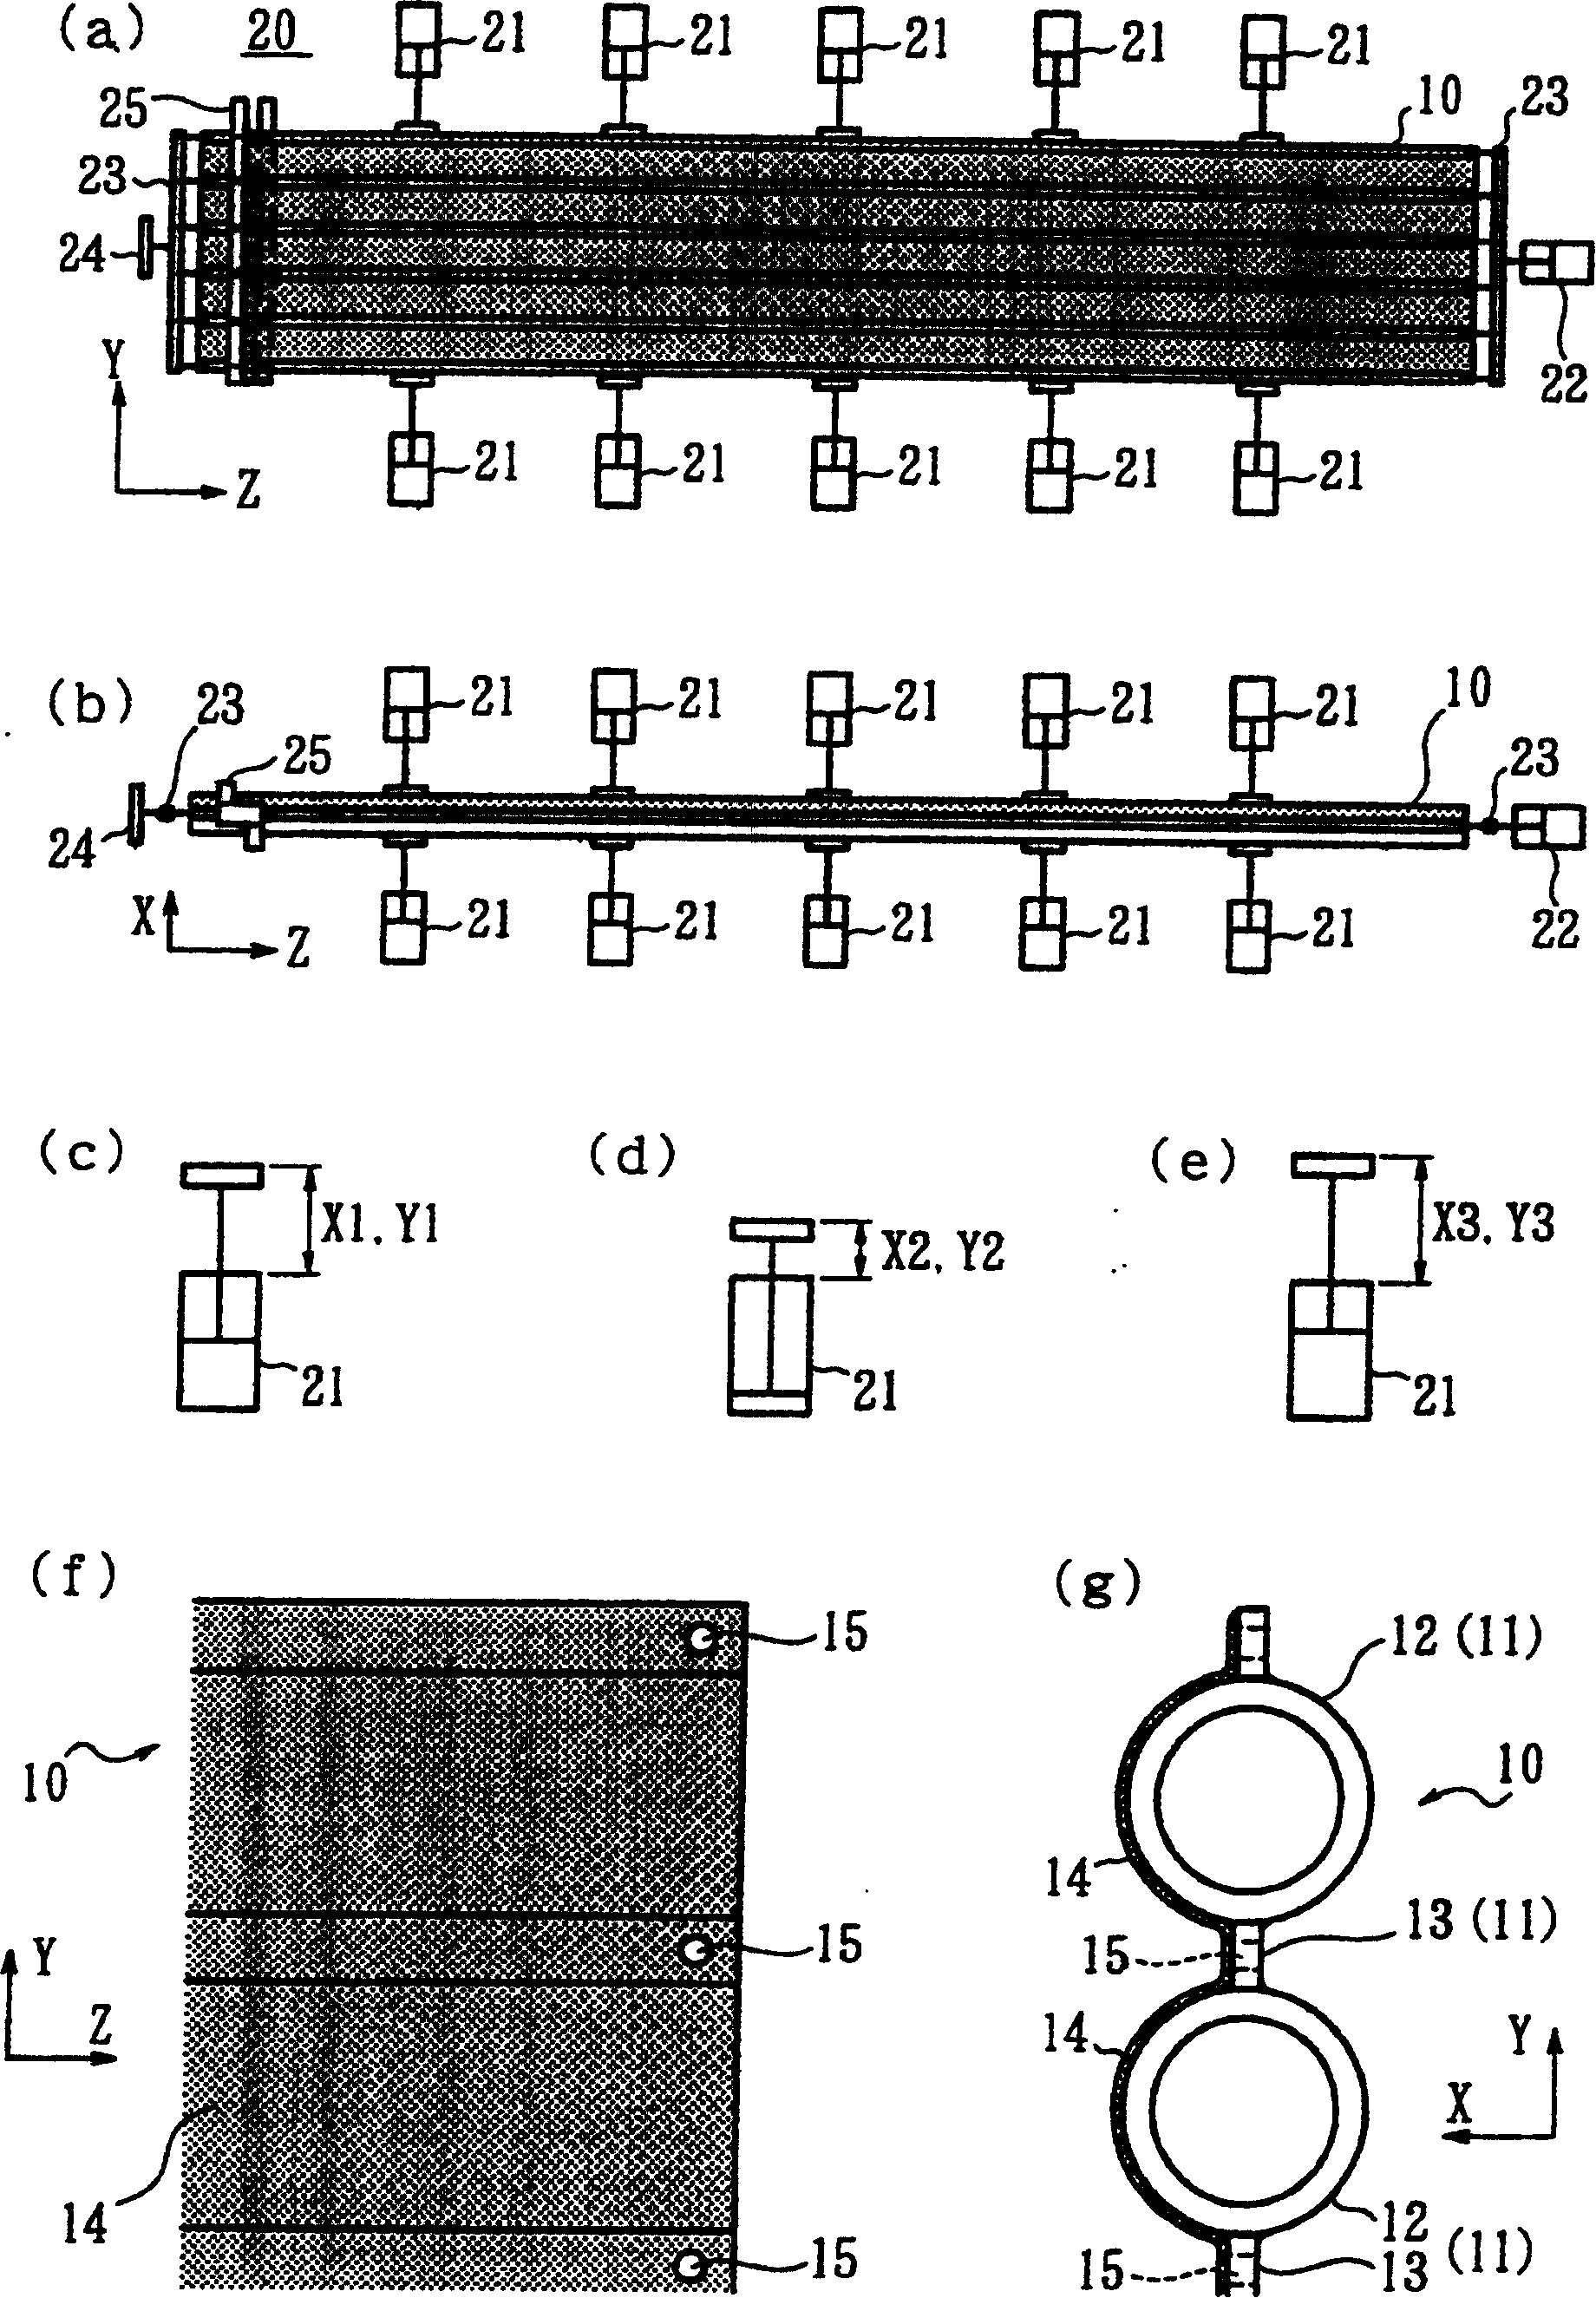 Boiler plate heating device and method